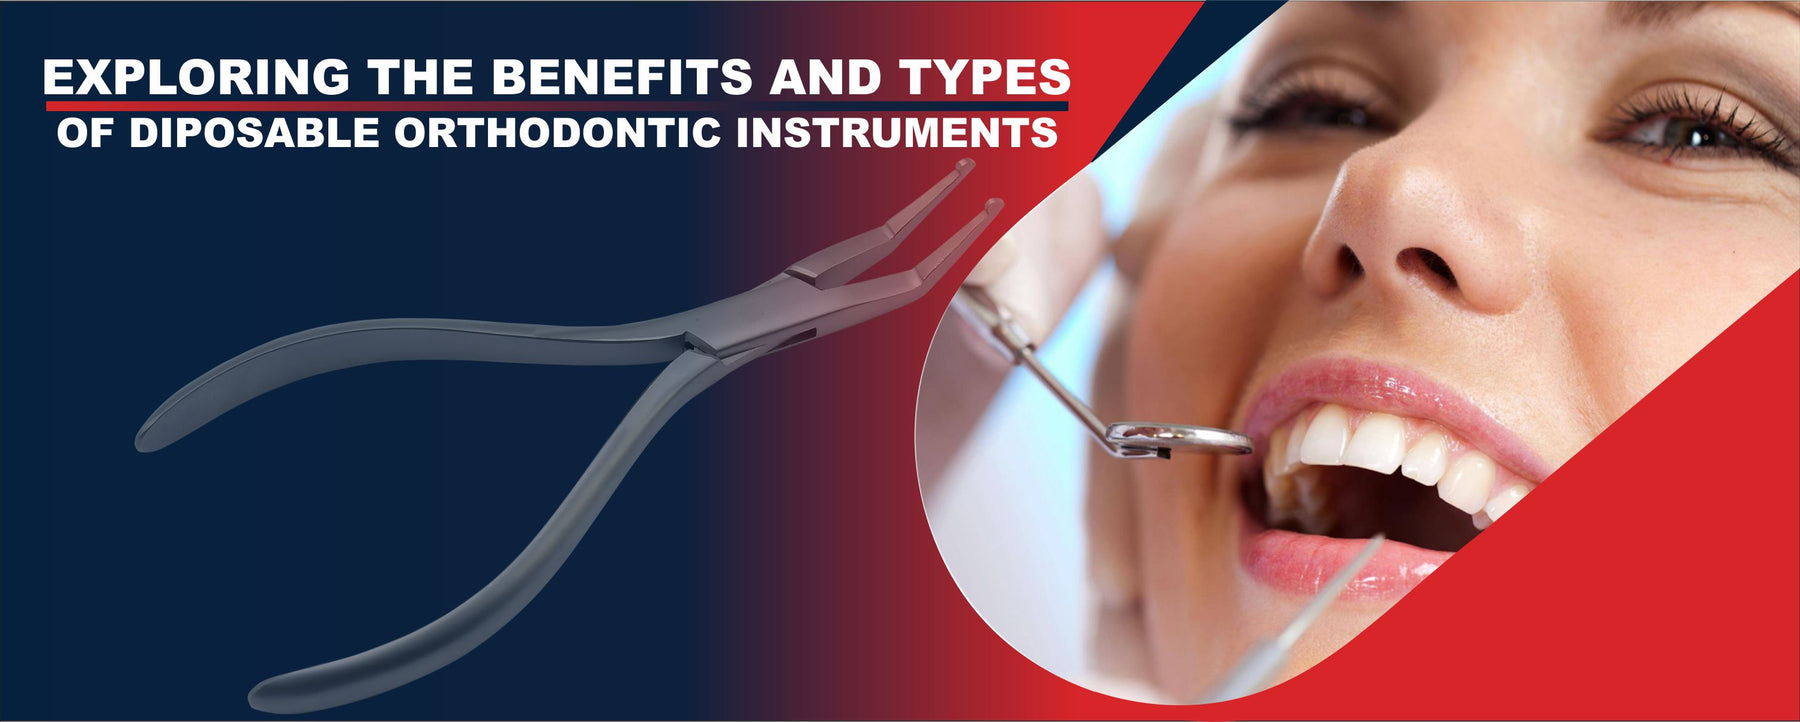 Exploring the Benefits and types of Disposable Orthodontic Instruments